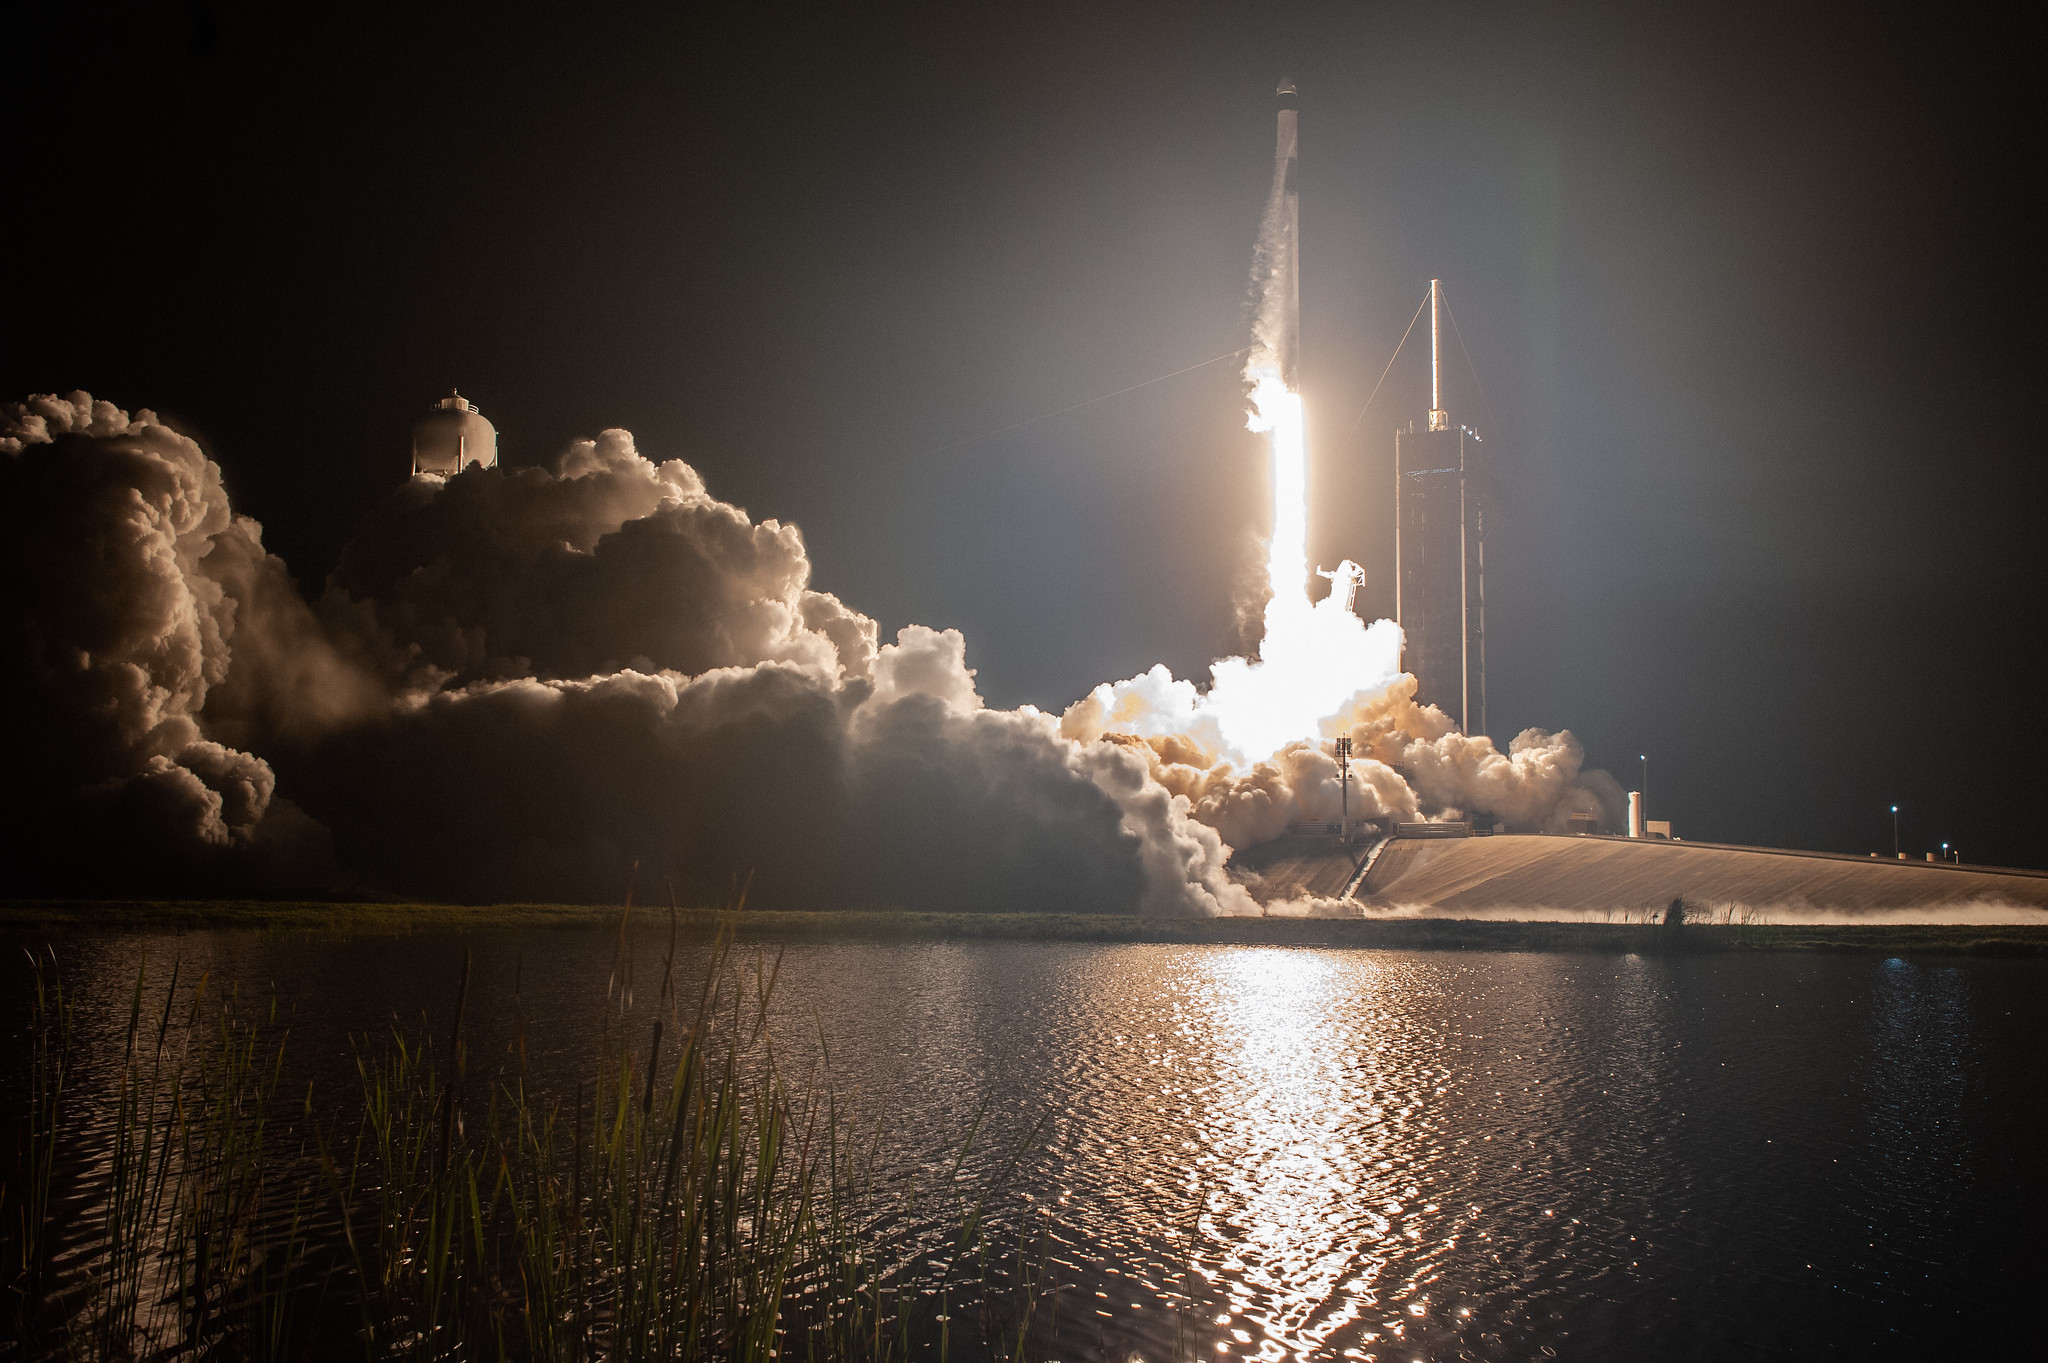 The SpaceX Falcon 9 rocket, with the company’s Crew Dragon atop, lifts off from Launch Pad 39A at Kennedy Space Center in Florida for NASA’s SpaceX Crew-4 mission on April 27, 2022, at 3:52 a.m. EDT.